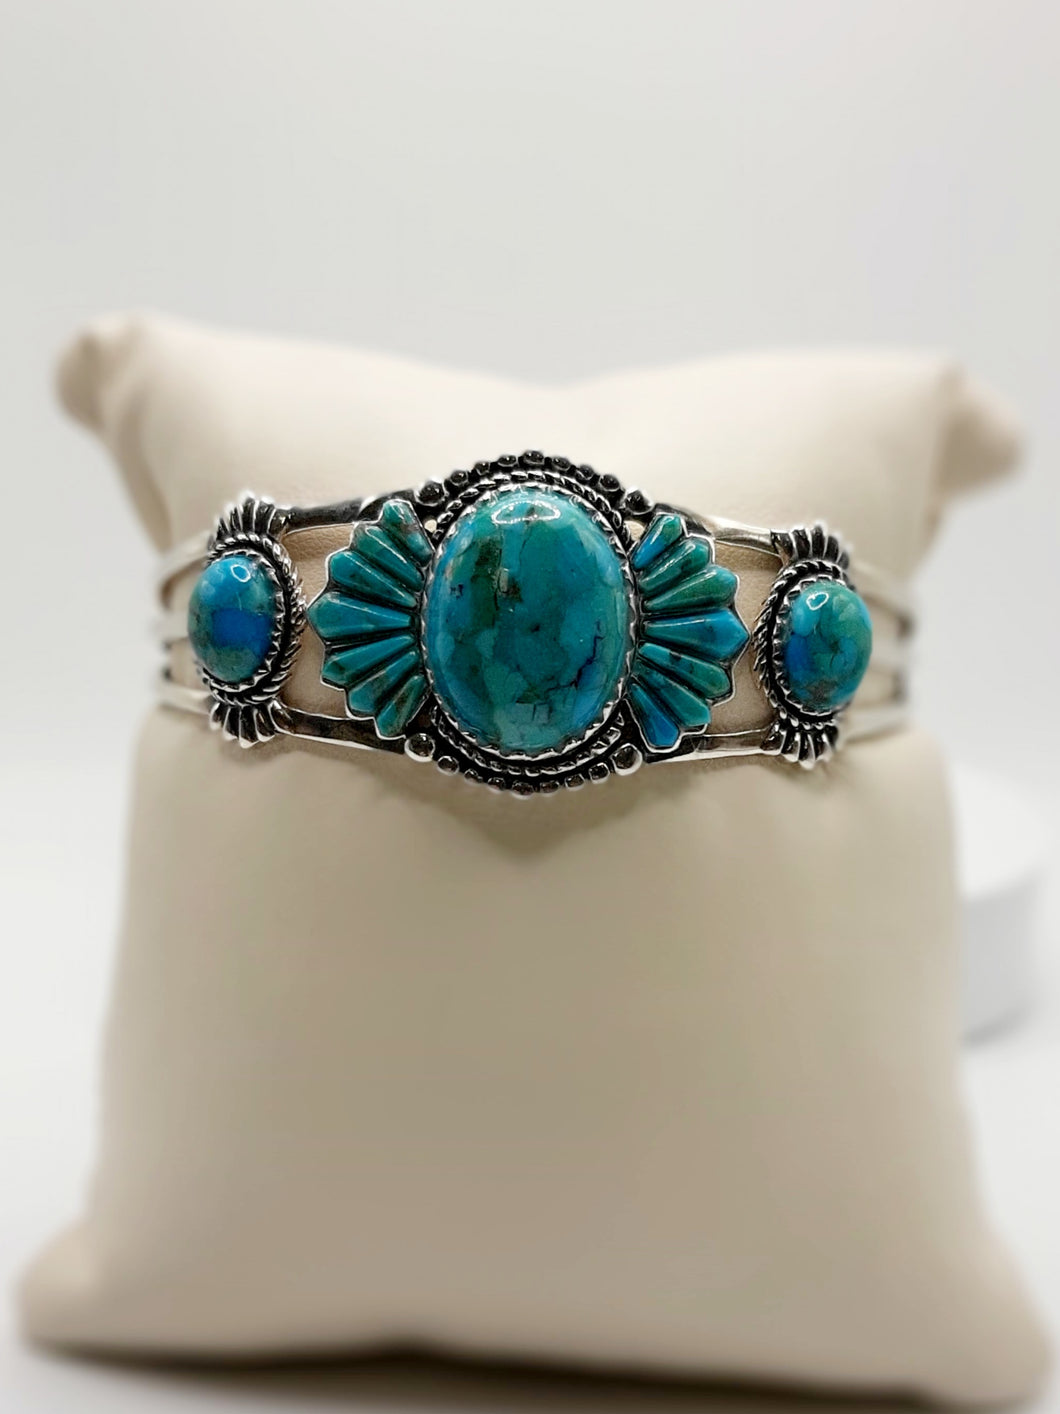 Sterling Silver Cuff Bracelet Featuring Turquoise